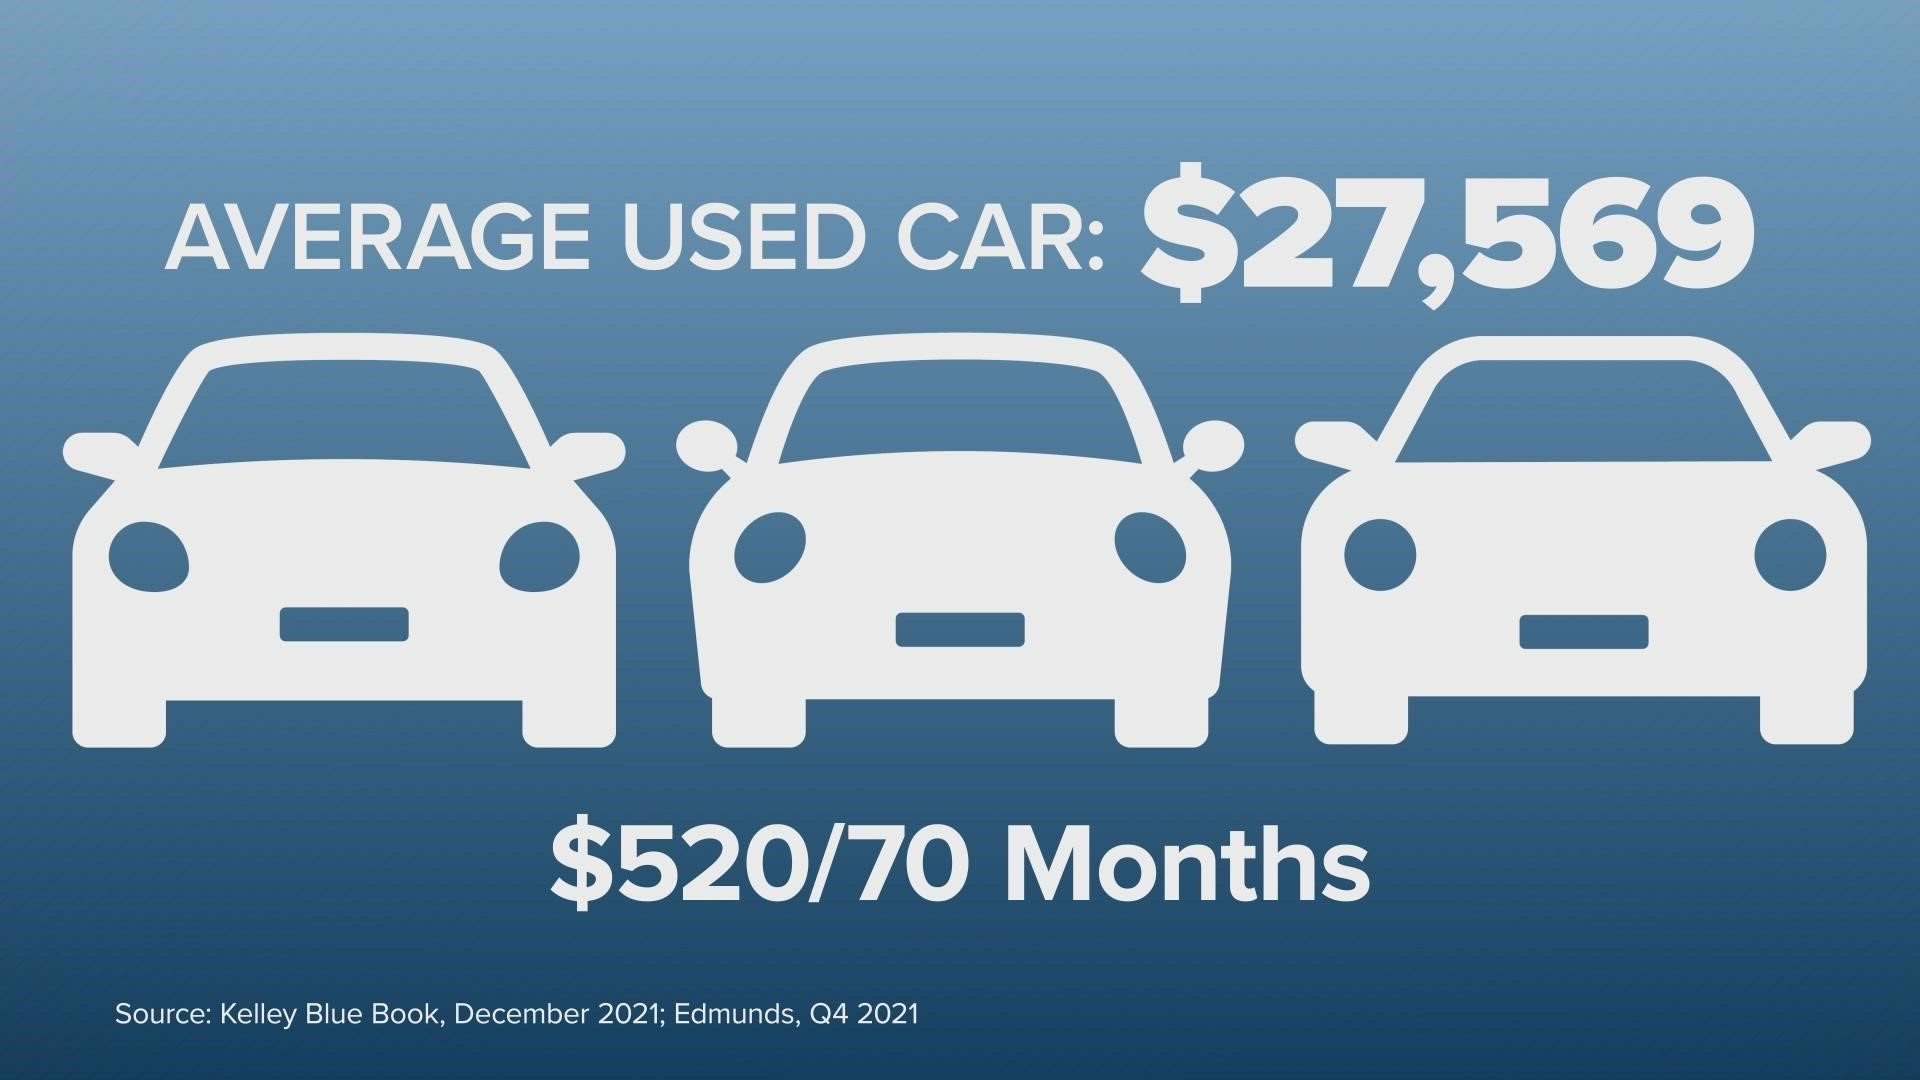 Used vehicles are fetching record prices, and record-high monthly payments.